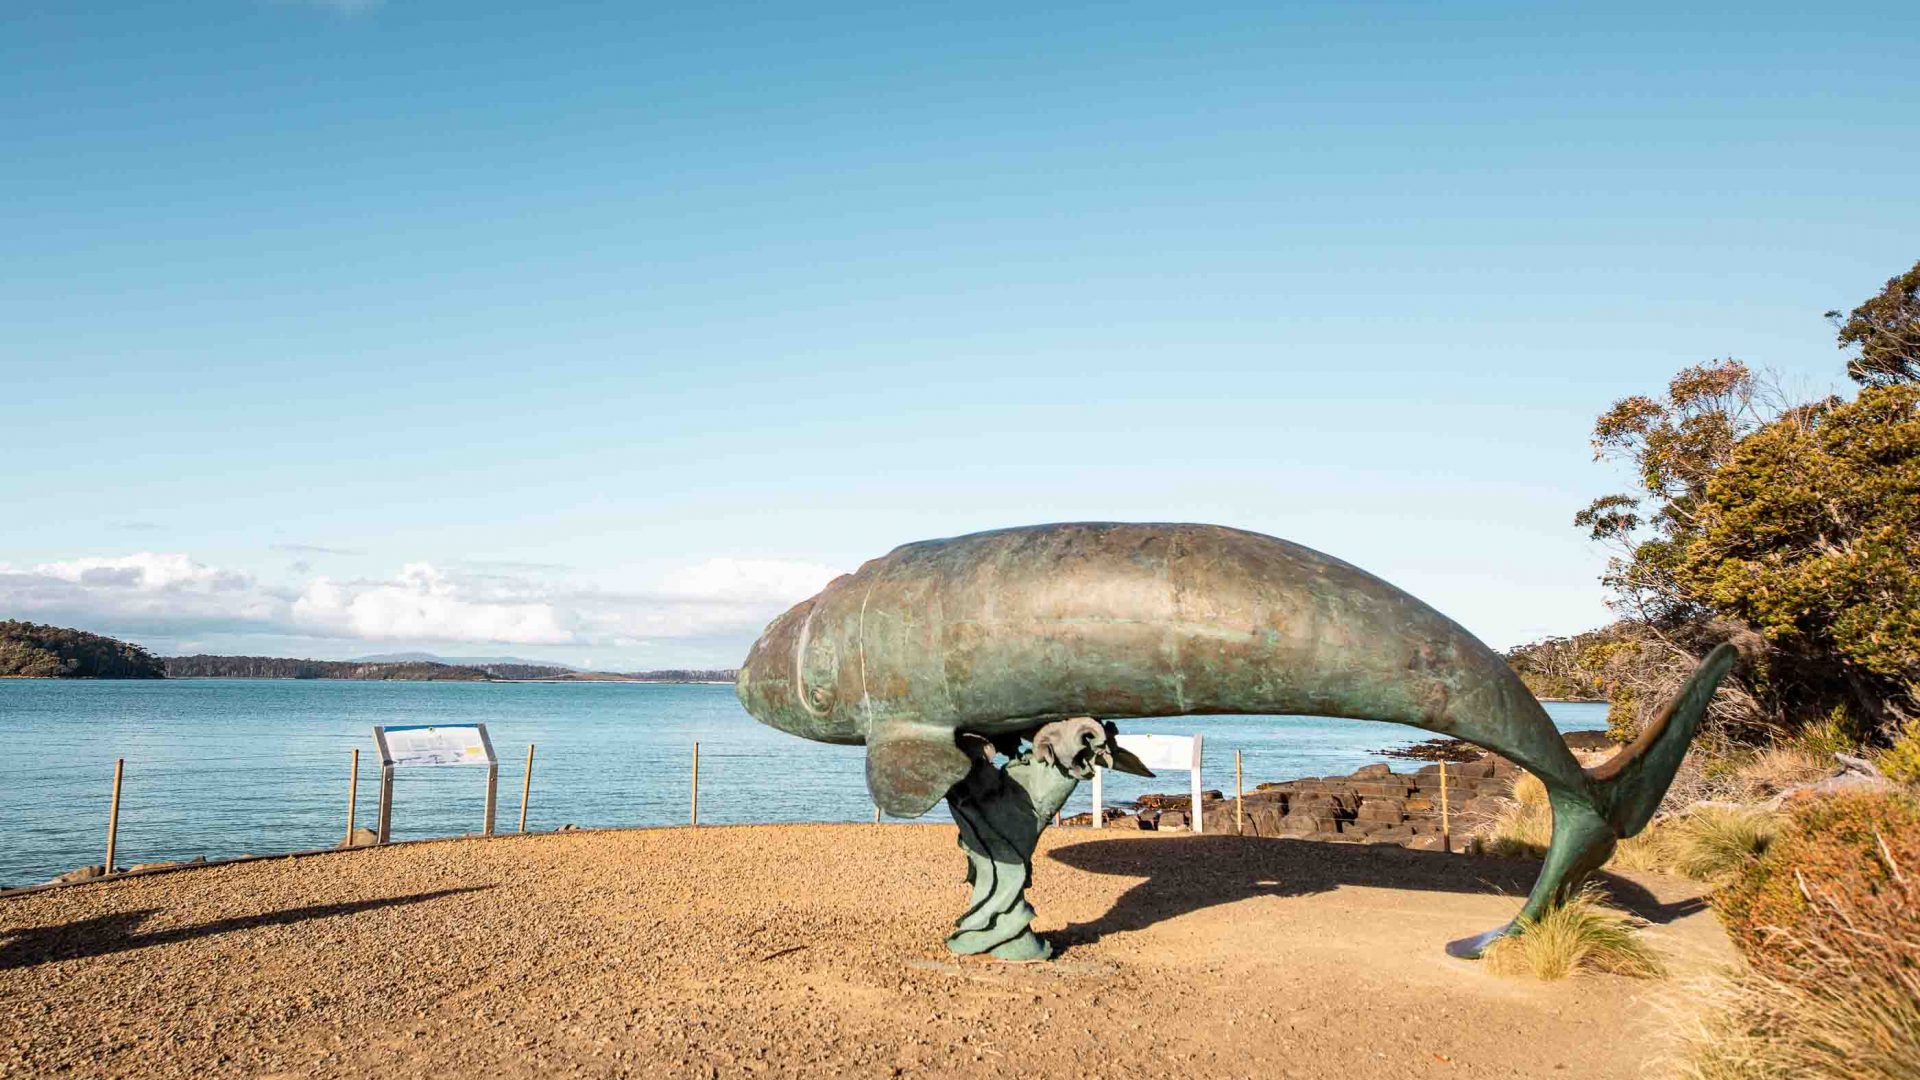 A whale monument by the bay.